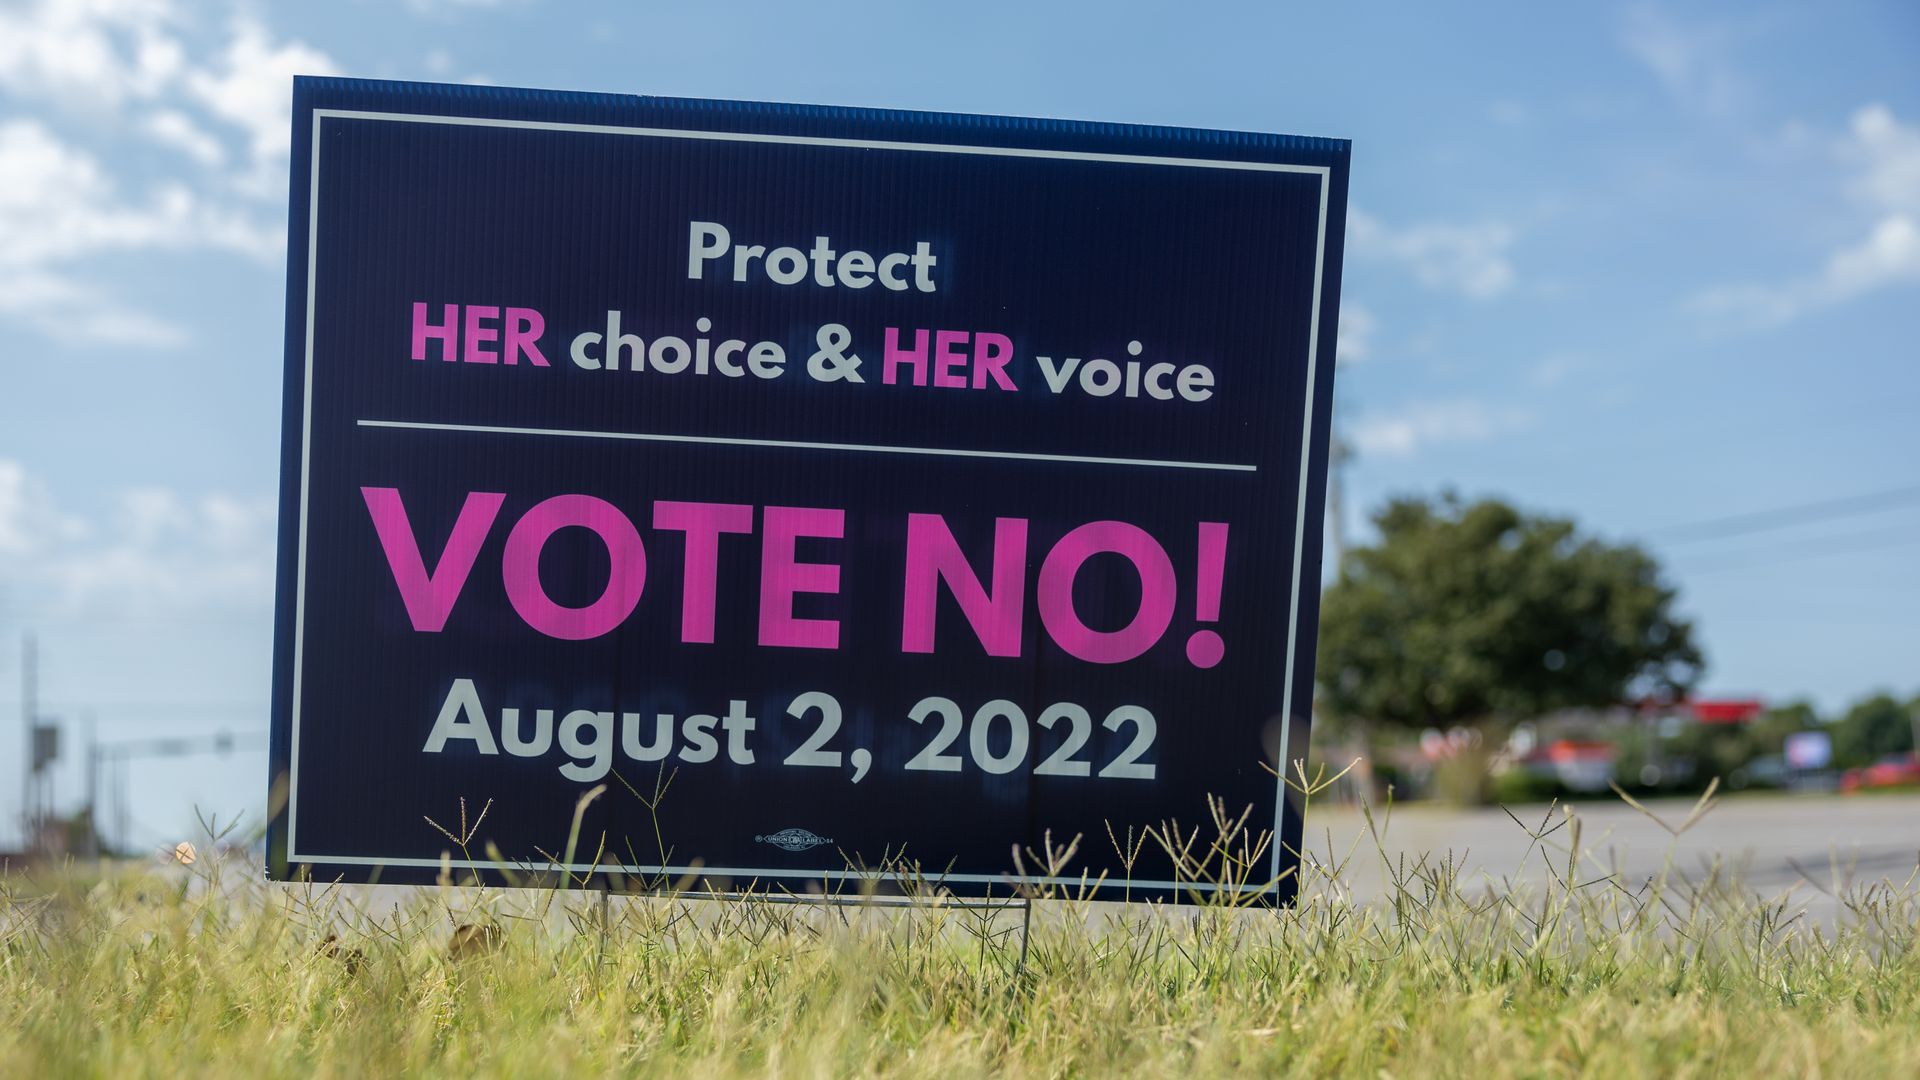 A campaign sign in Kansas urges a no-vote on an anti-abortion ballot measure